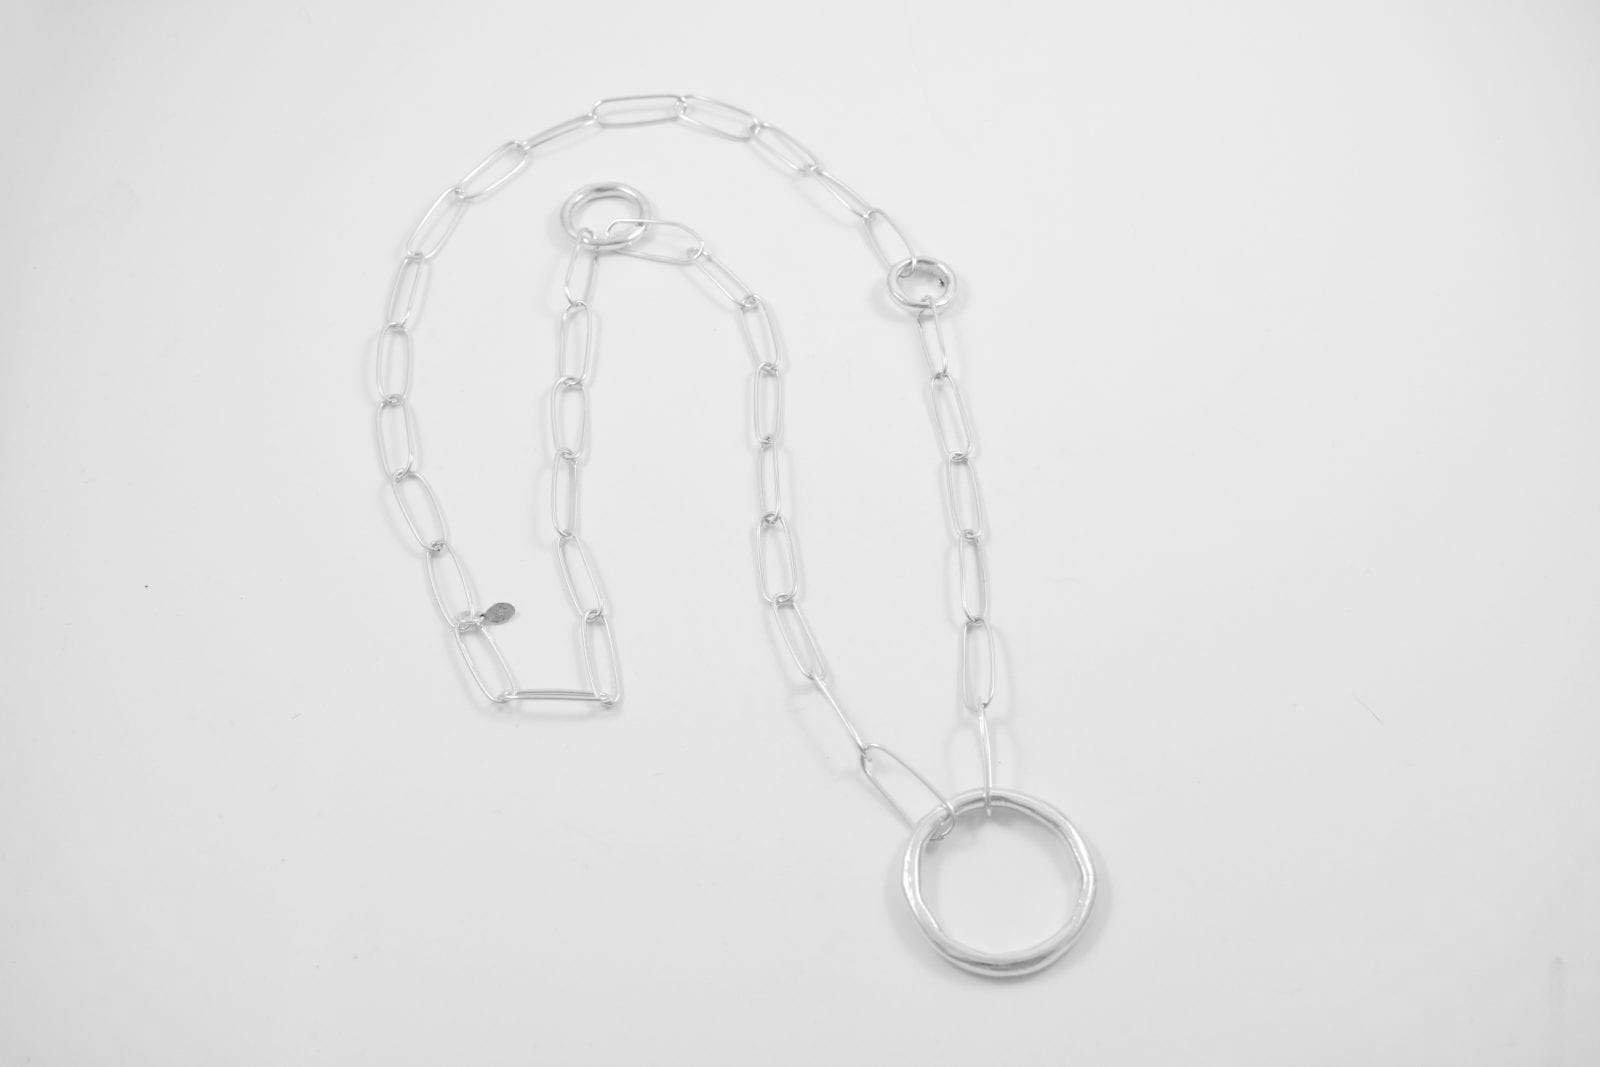 Madeline Necklace lain flat showing a more detailed view of the individual handmade sterling silver links and contrasting solid cast circles.